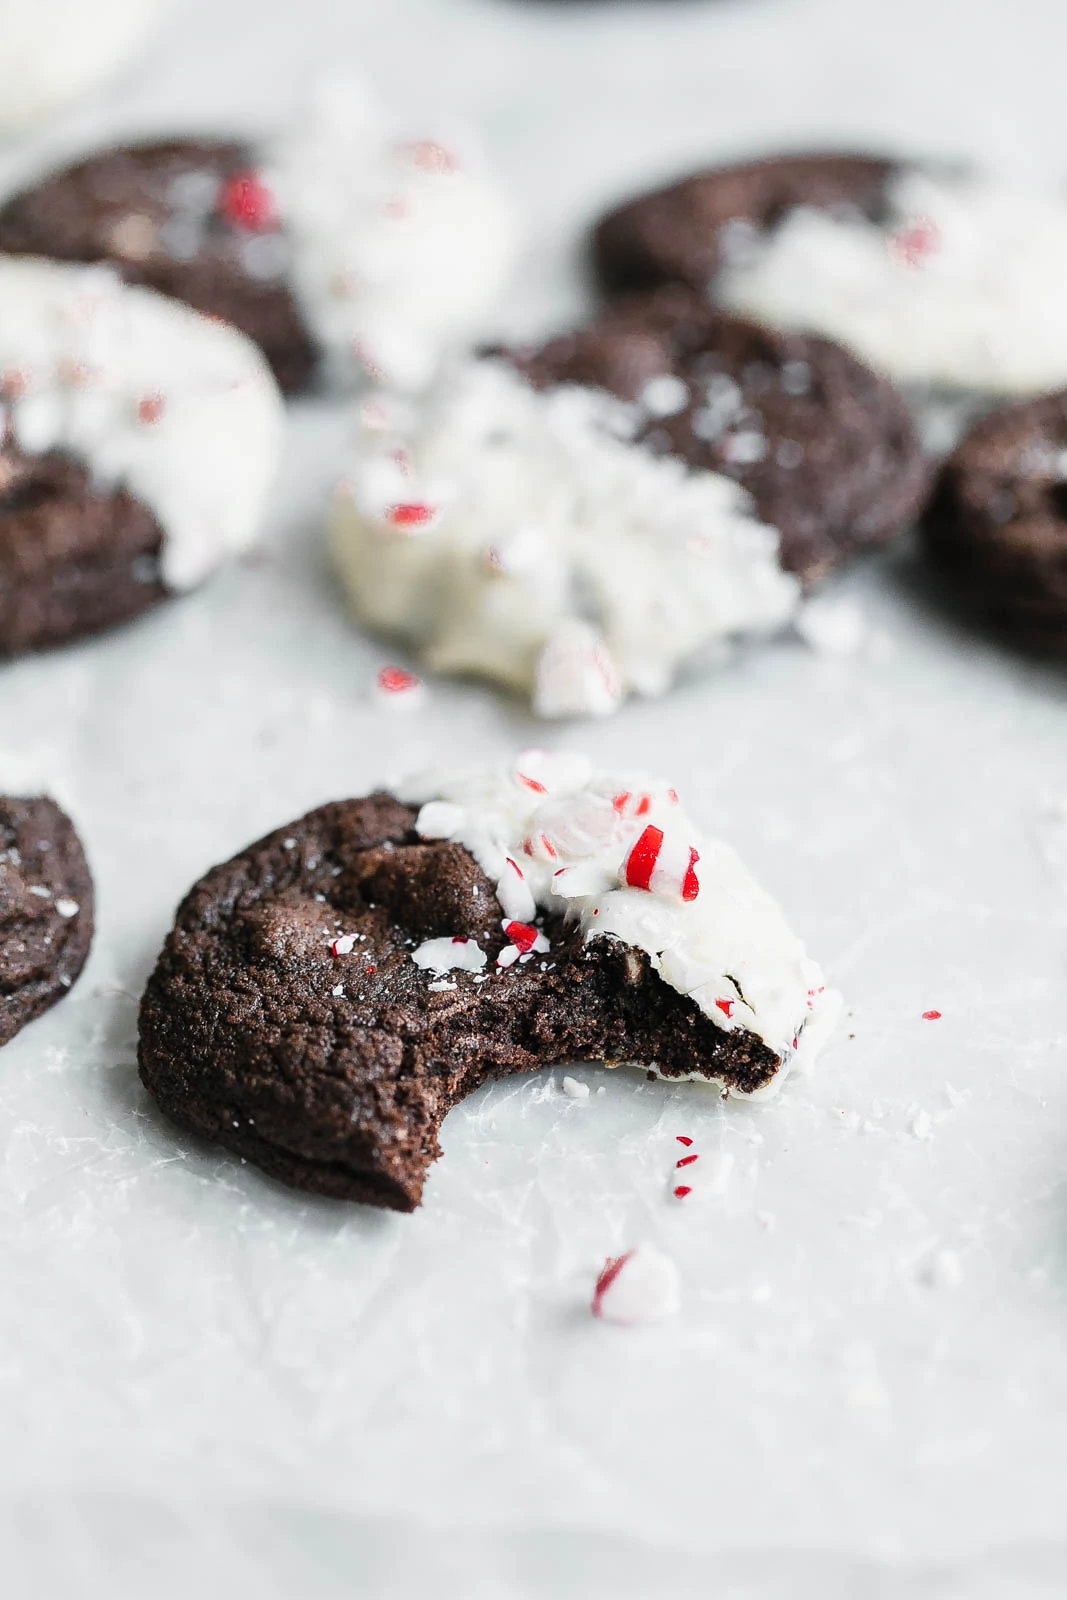 A chewy Chocolate White Chocolate Peppermint Cookie dipped in white chocolate and covered in peppermint candies. So perfect for the holidays!